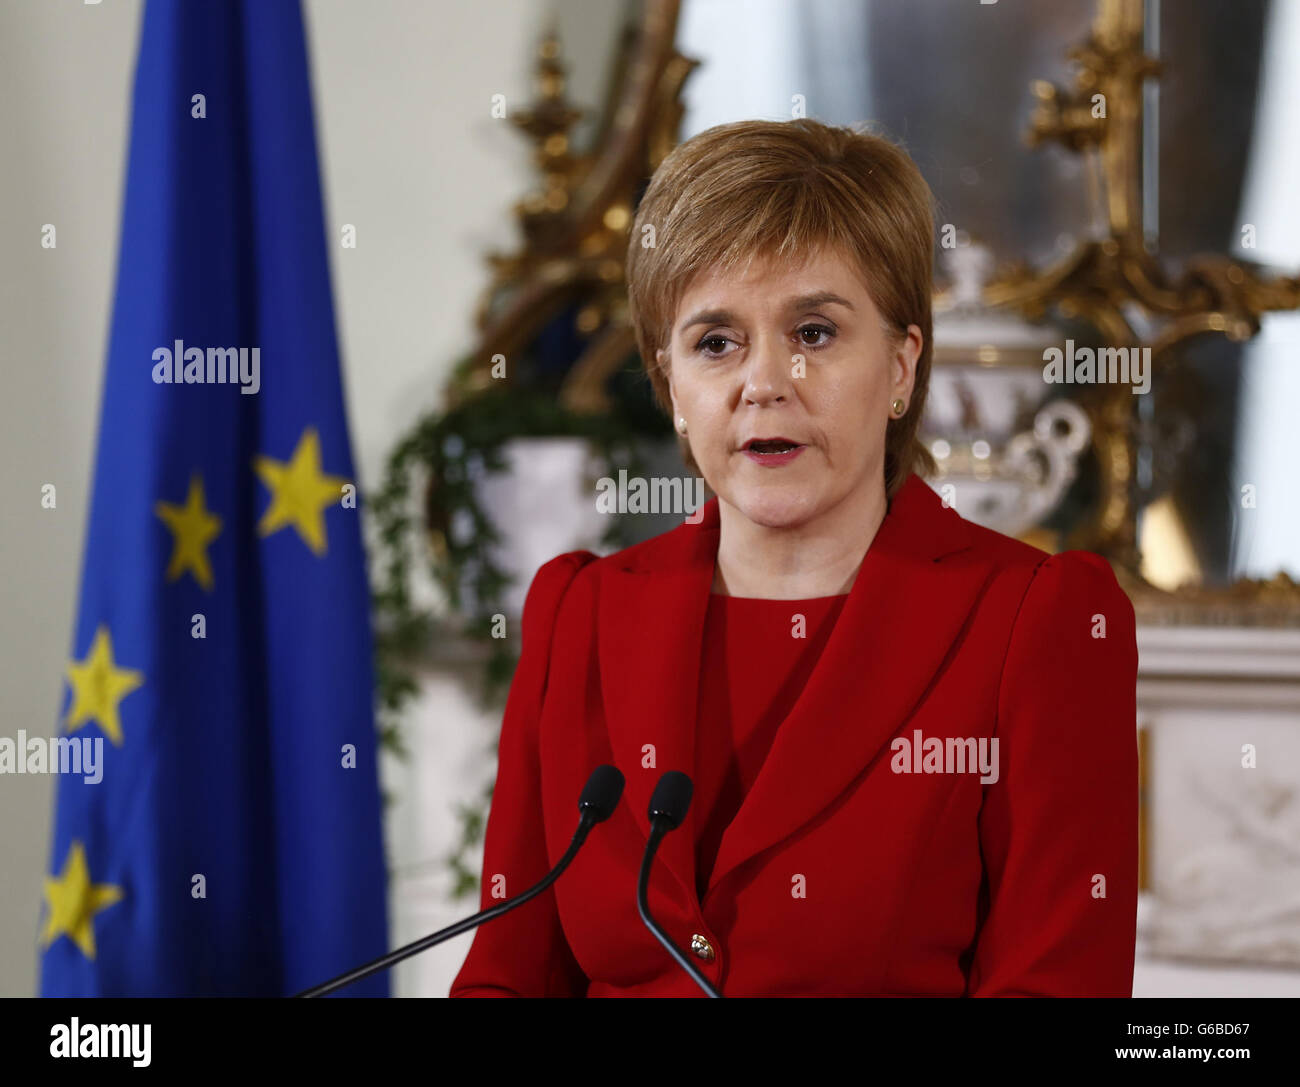 Edinburgh, Britain. 24th June, 2016. Scottish First Minister Nicola Sturgeon speaks at a press conference in Edinburgh, Scotland, Britain, June 24, 2016. Scottish First Minister Nicola Sturgeon said here Friday a second independence referendum was 'highly likely' after Britain voted to leave the EU. © Scottish government/Xinhua/Alamy Live News Stock Photo